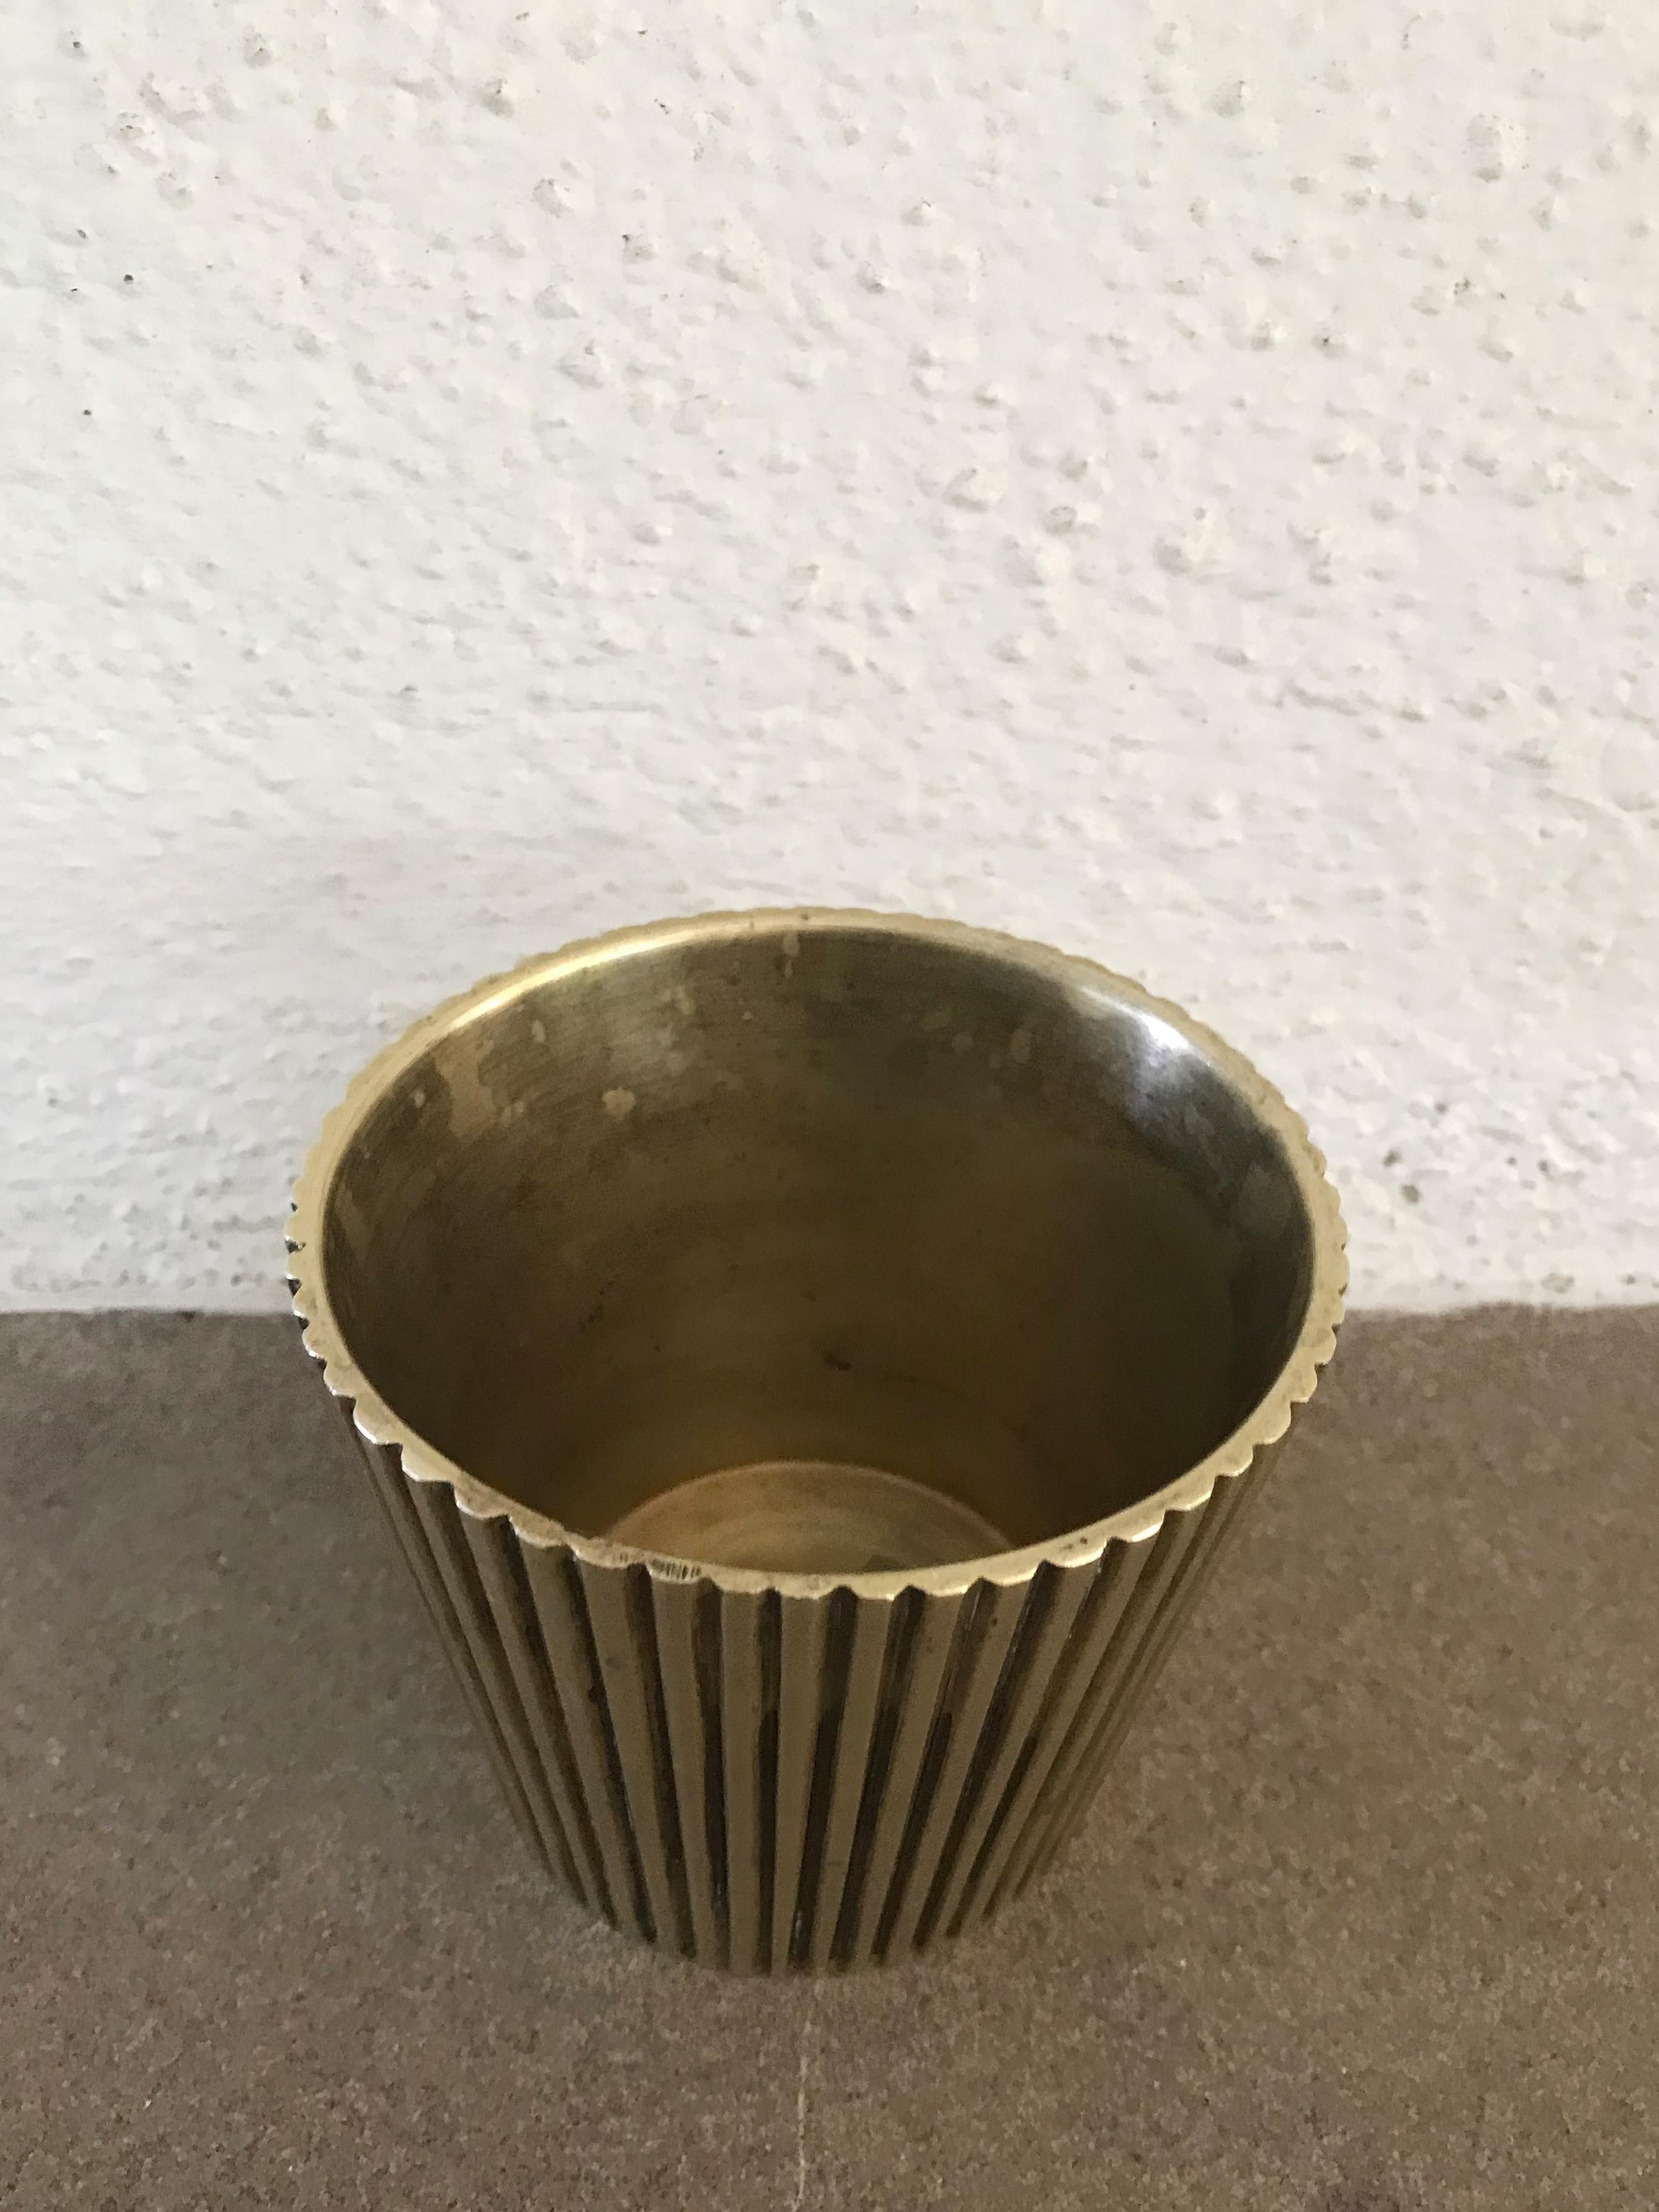 Scandinavian midcentury modern design vase in solid brass produed in Denmark, circa 1950s.
Please note that the item is original of the period and this shows normal signs of age and use.